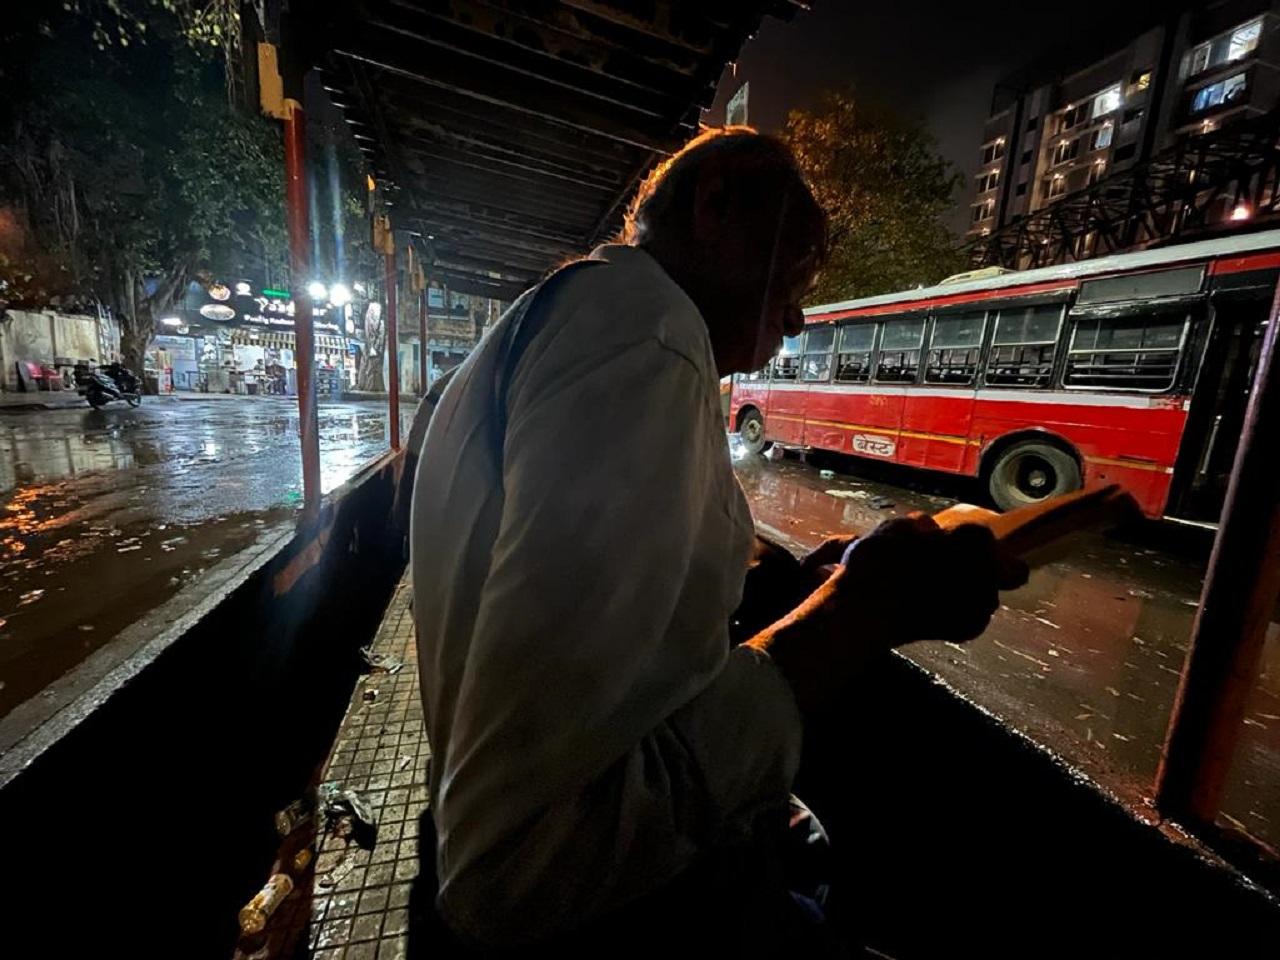 The Indian Meteorological Department (IMD), in its latest weather forecast, has predicted more thundershowers in Mumbai till tomorrow
Also Read: Weather update: IMD predicts light to moderate rainfall in Mumbai, Thane